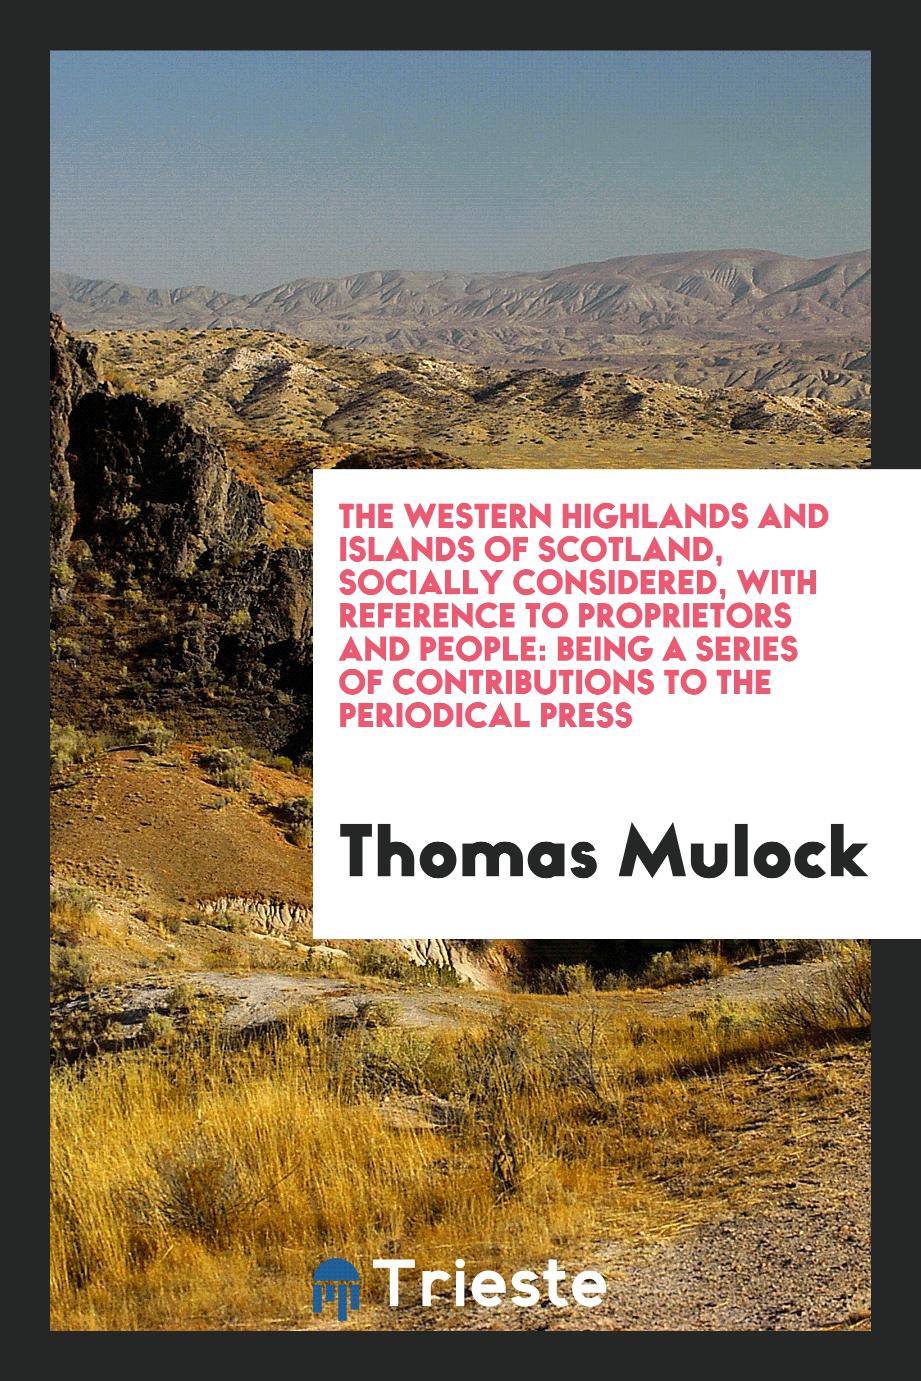 The Western Highlands and Islands of Scotland, Socially Considered, with Reference to Proprietors and People: Being a Series of Contributions to the Periodical Press